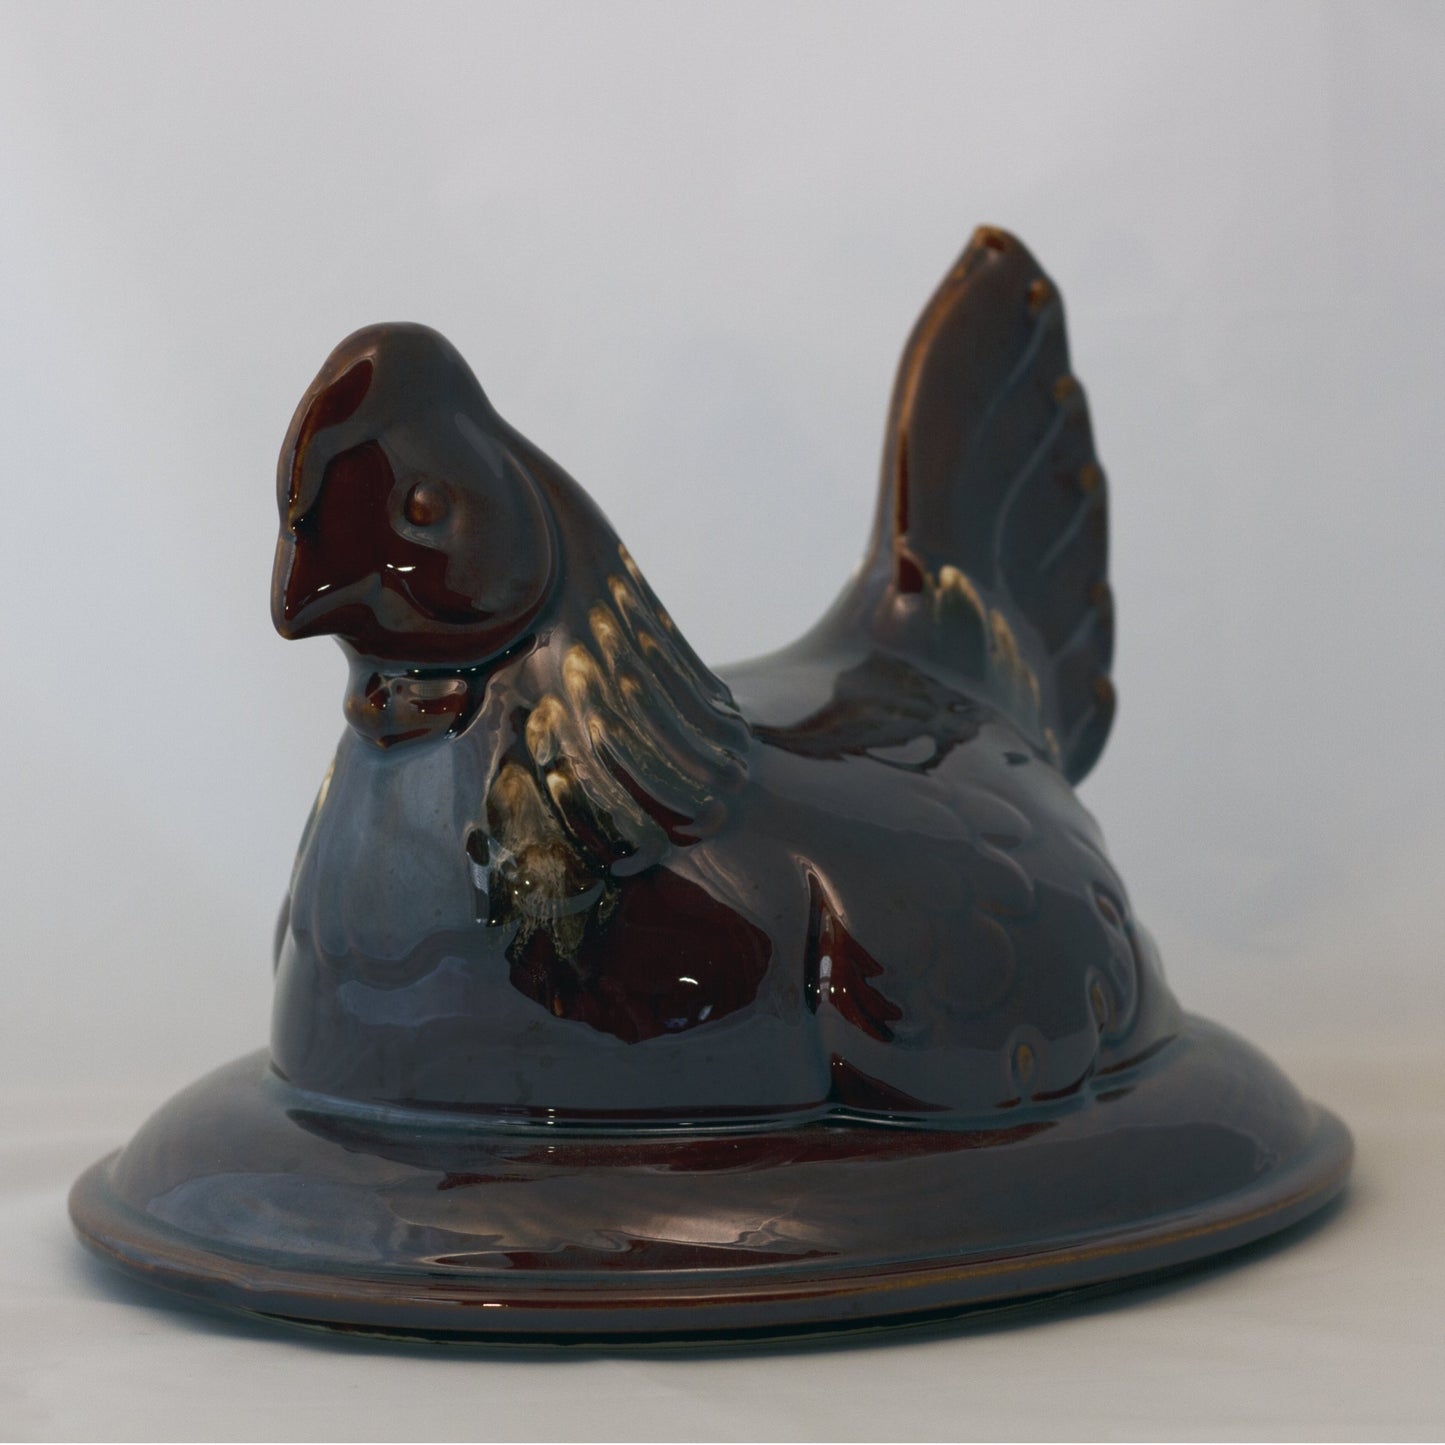 CHICKEN SERVER WITH COVER Hull House 'n Garden Mirror Brown "Drip" Circa Late 1960s to 1986